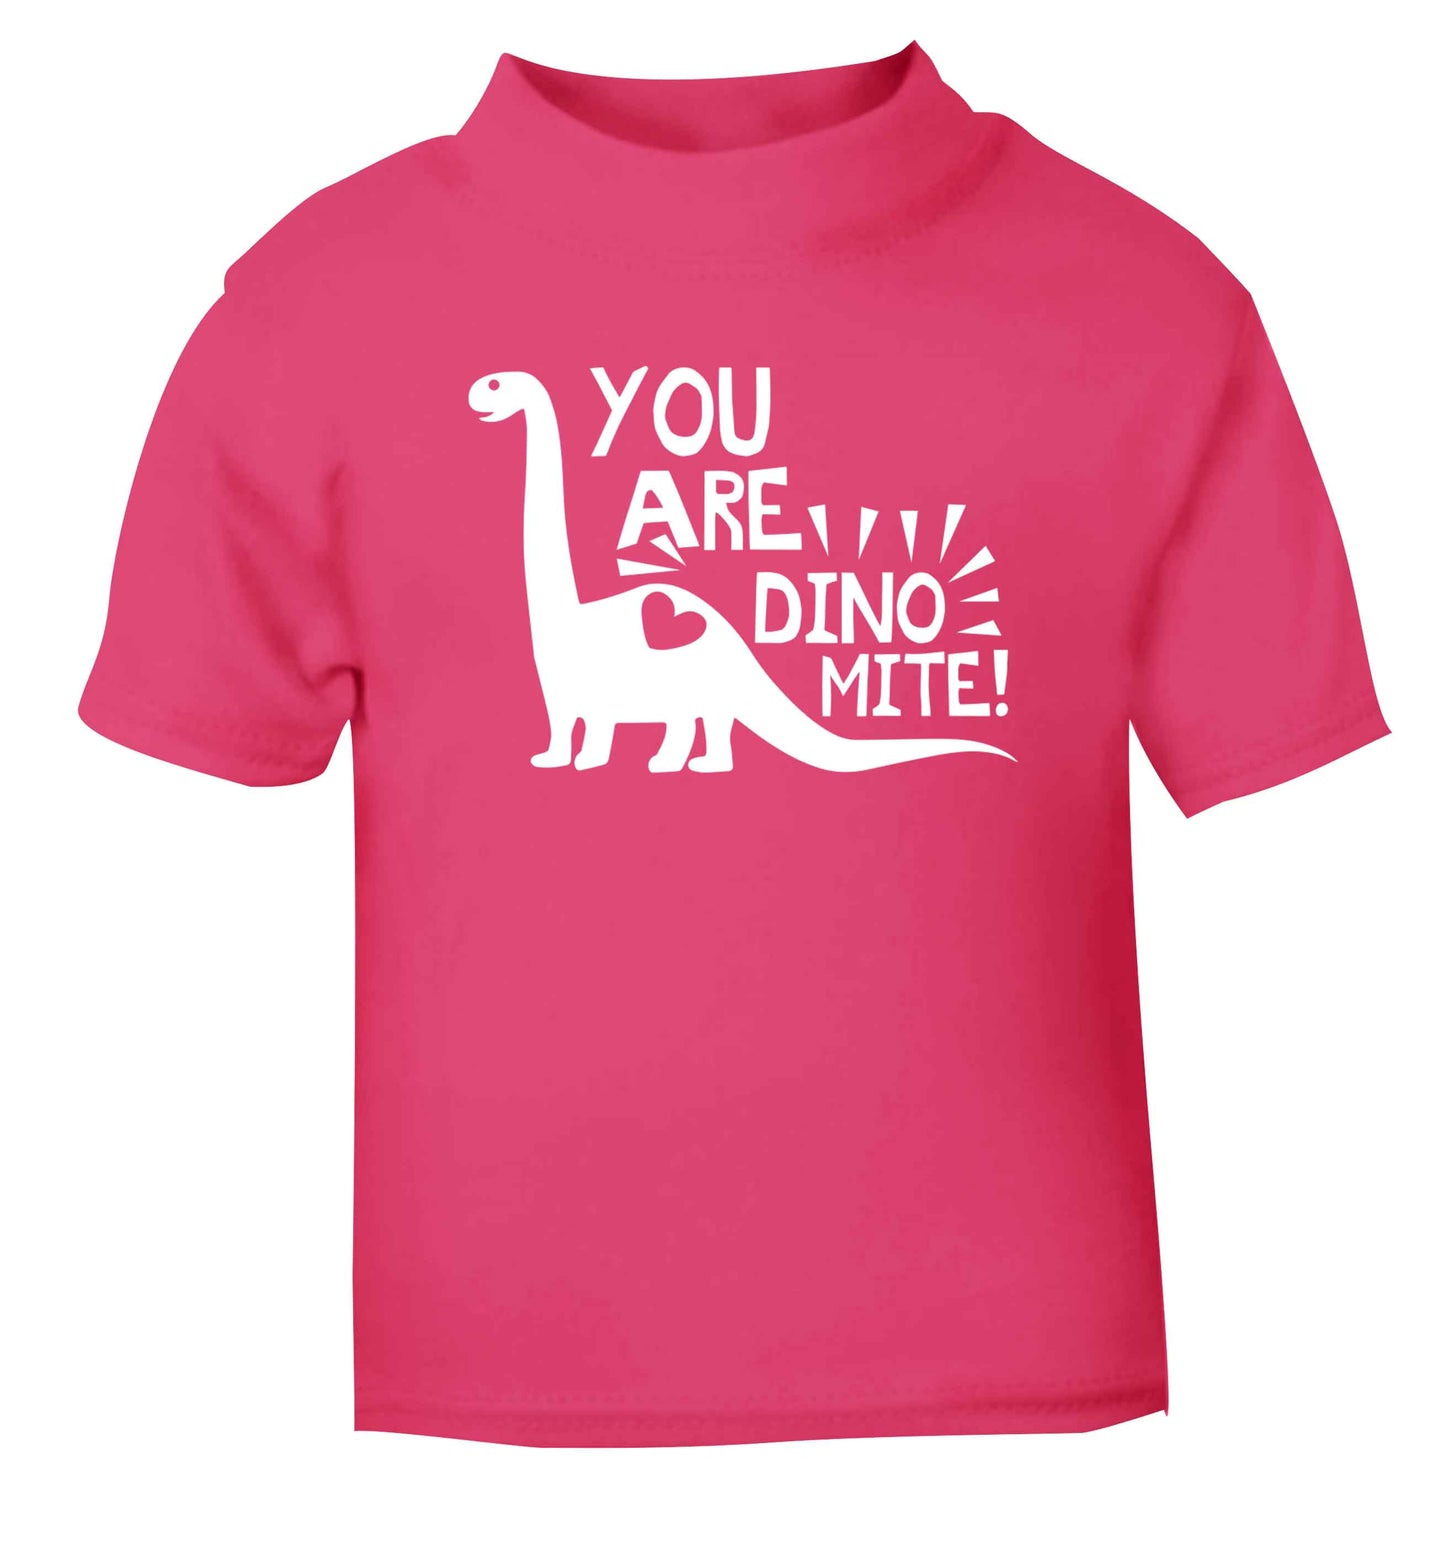 You are dinomite! pink Baby Toddler Tshirt 2 Years